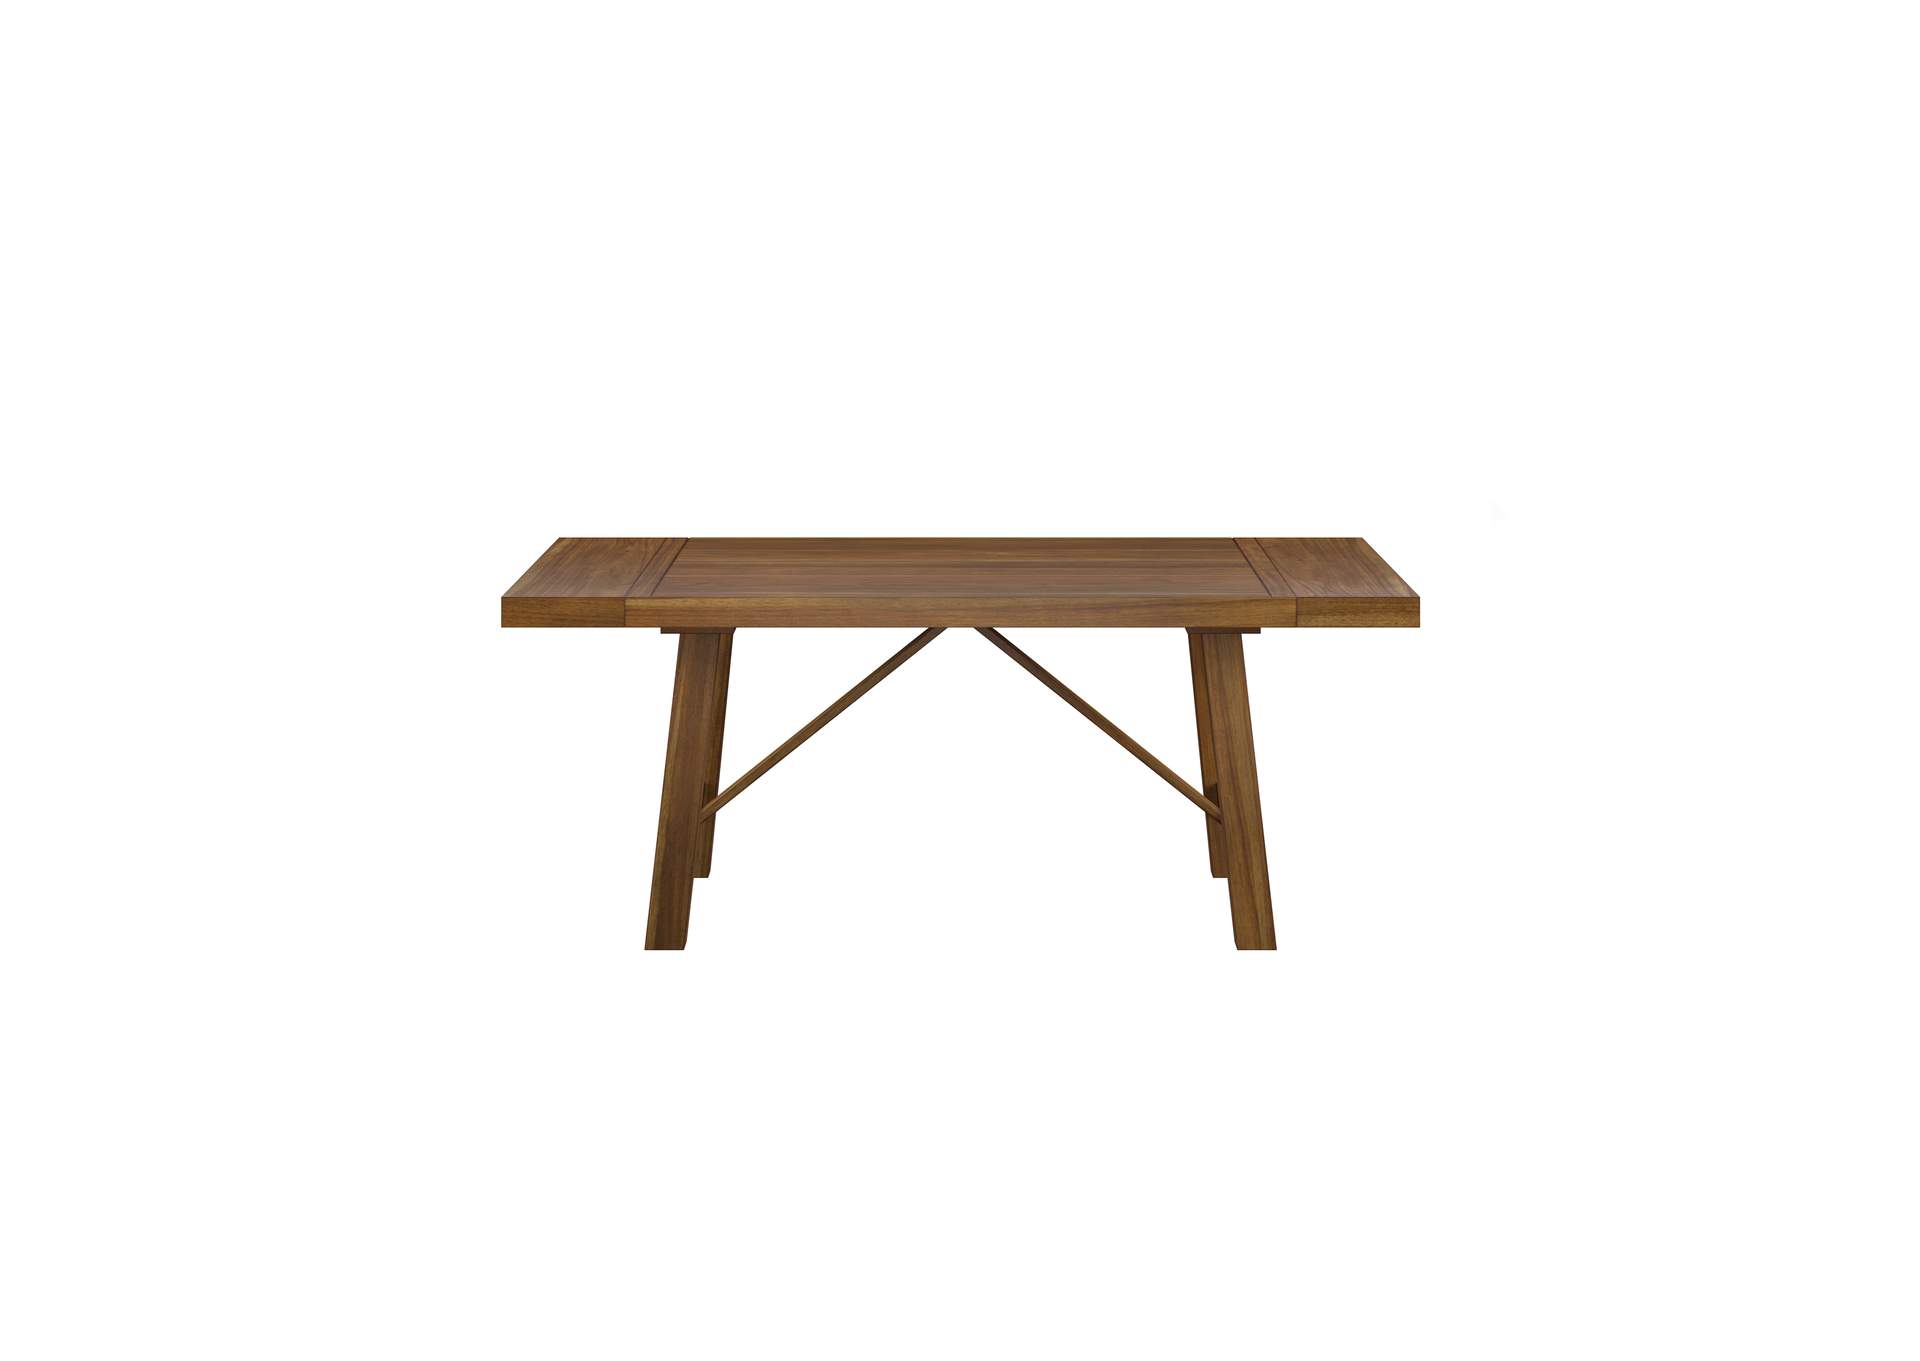 Darby Dining Table,Emerald Home Furnishings